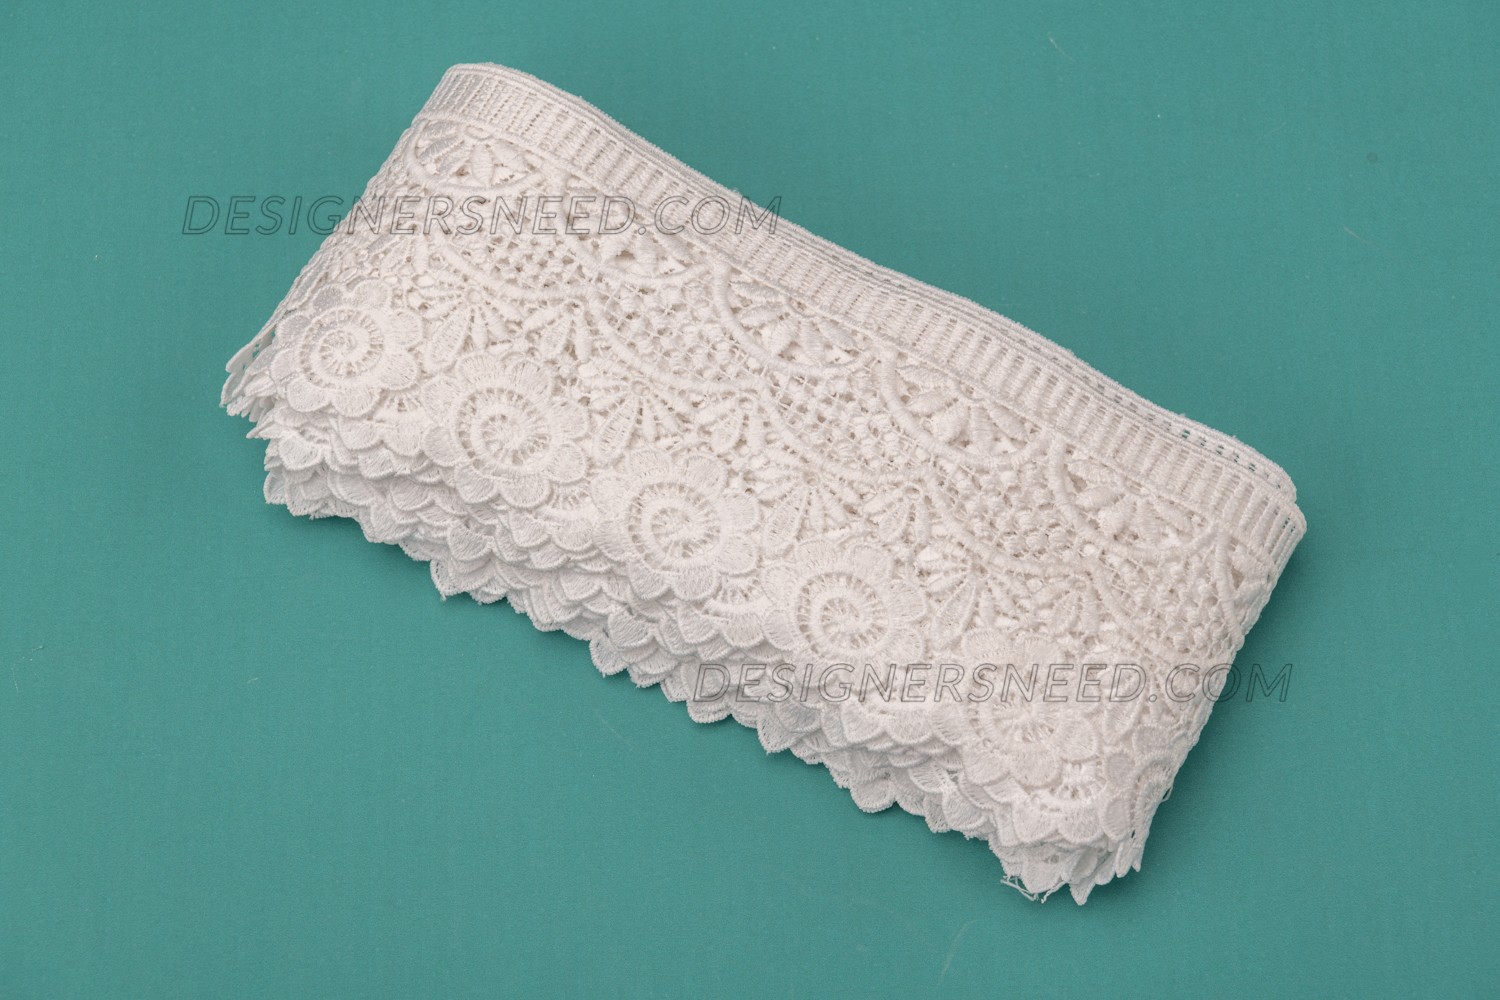 GPO Lace Flowers Polyester in White Color - Designers Need